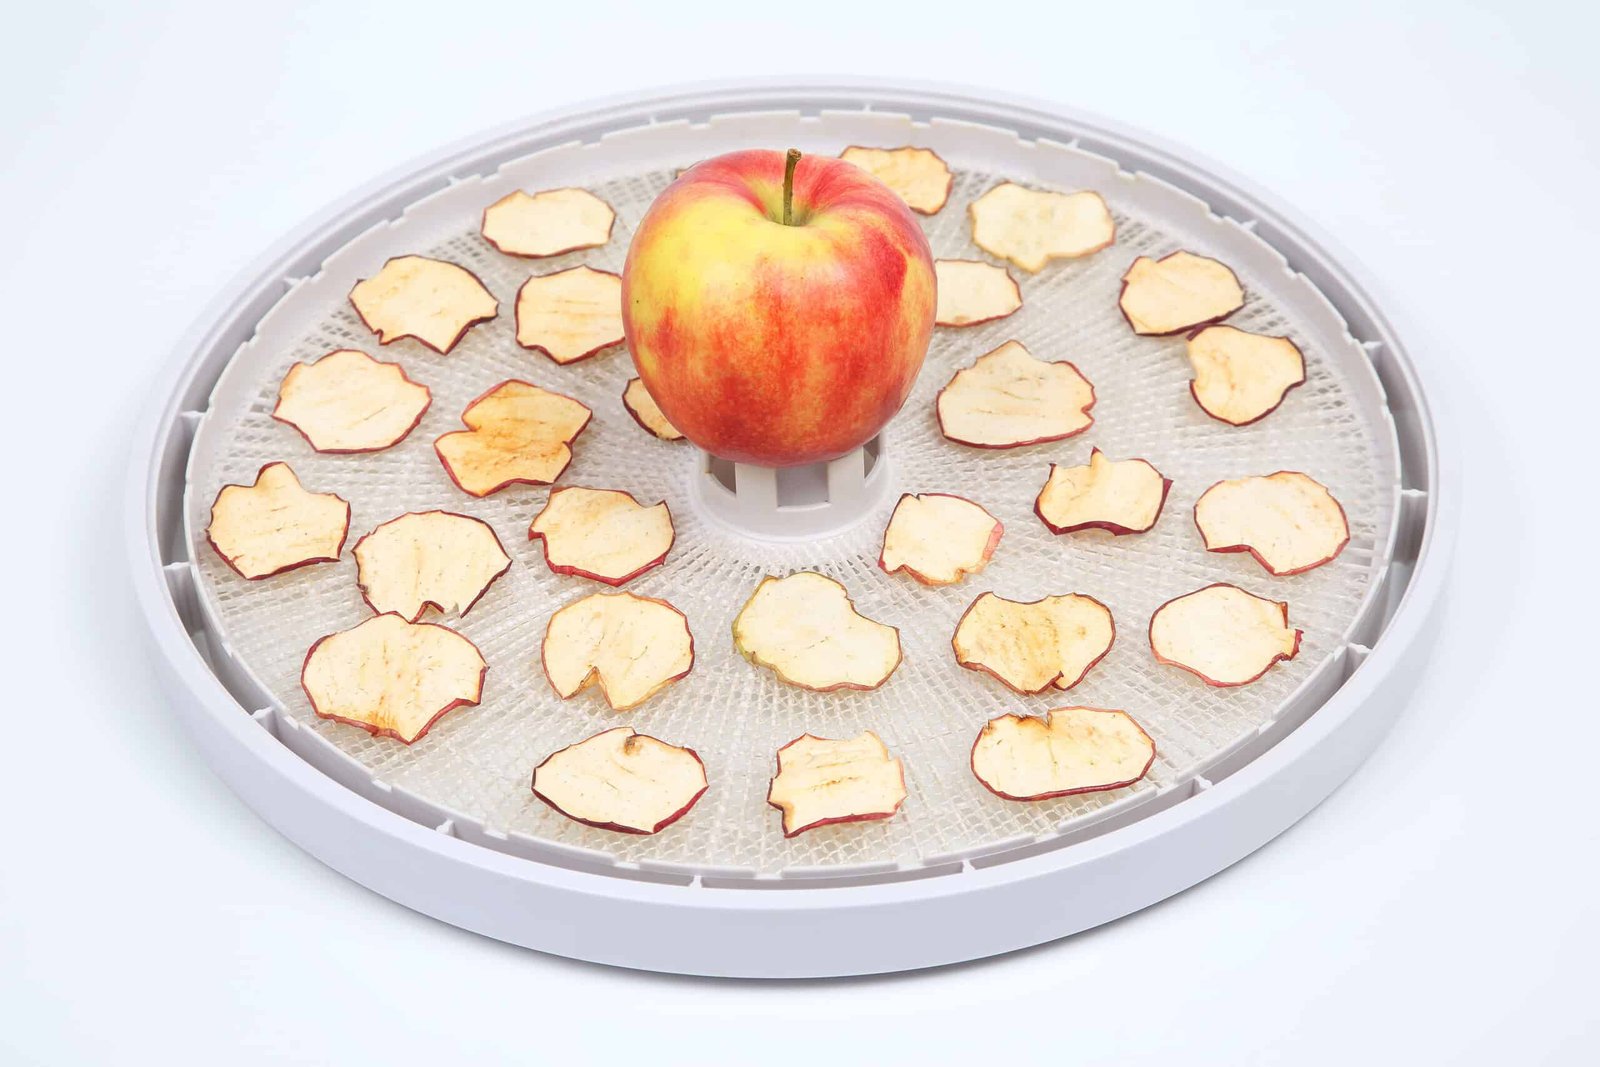 apple in the middle of circle dehydrator tray with dehydrated apple chips around the apple.